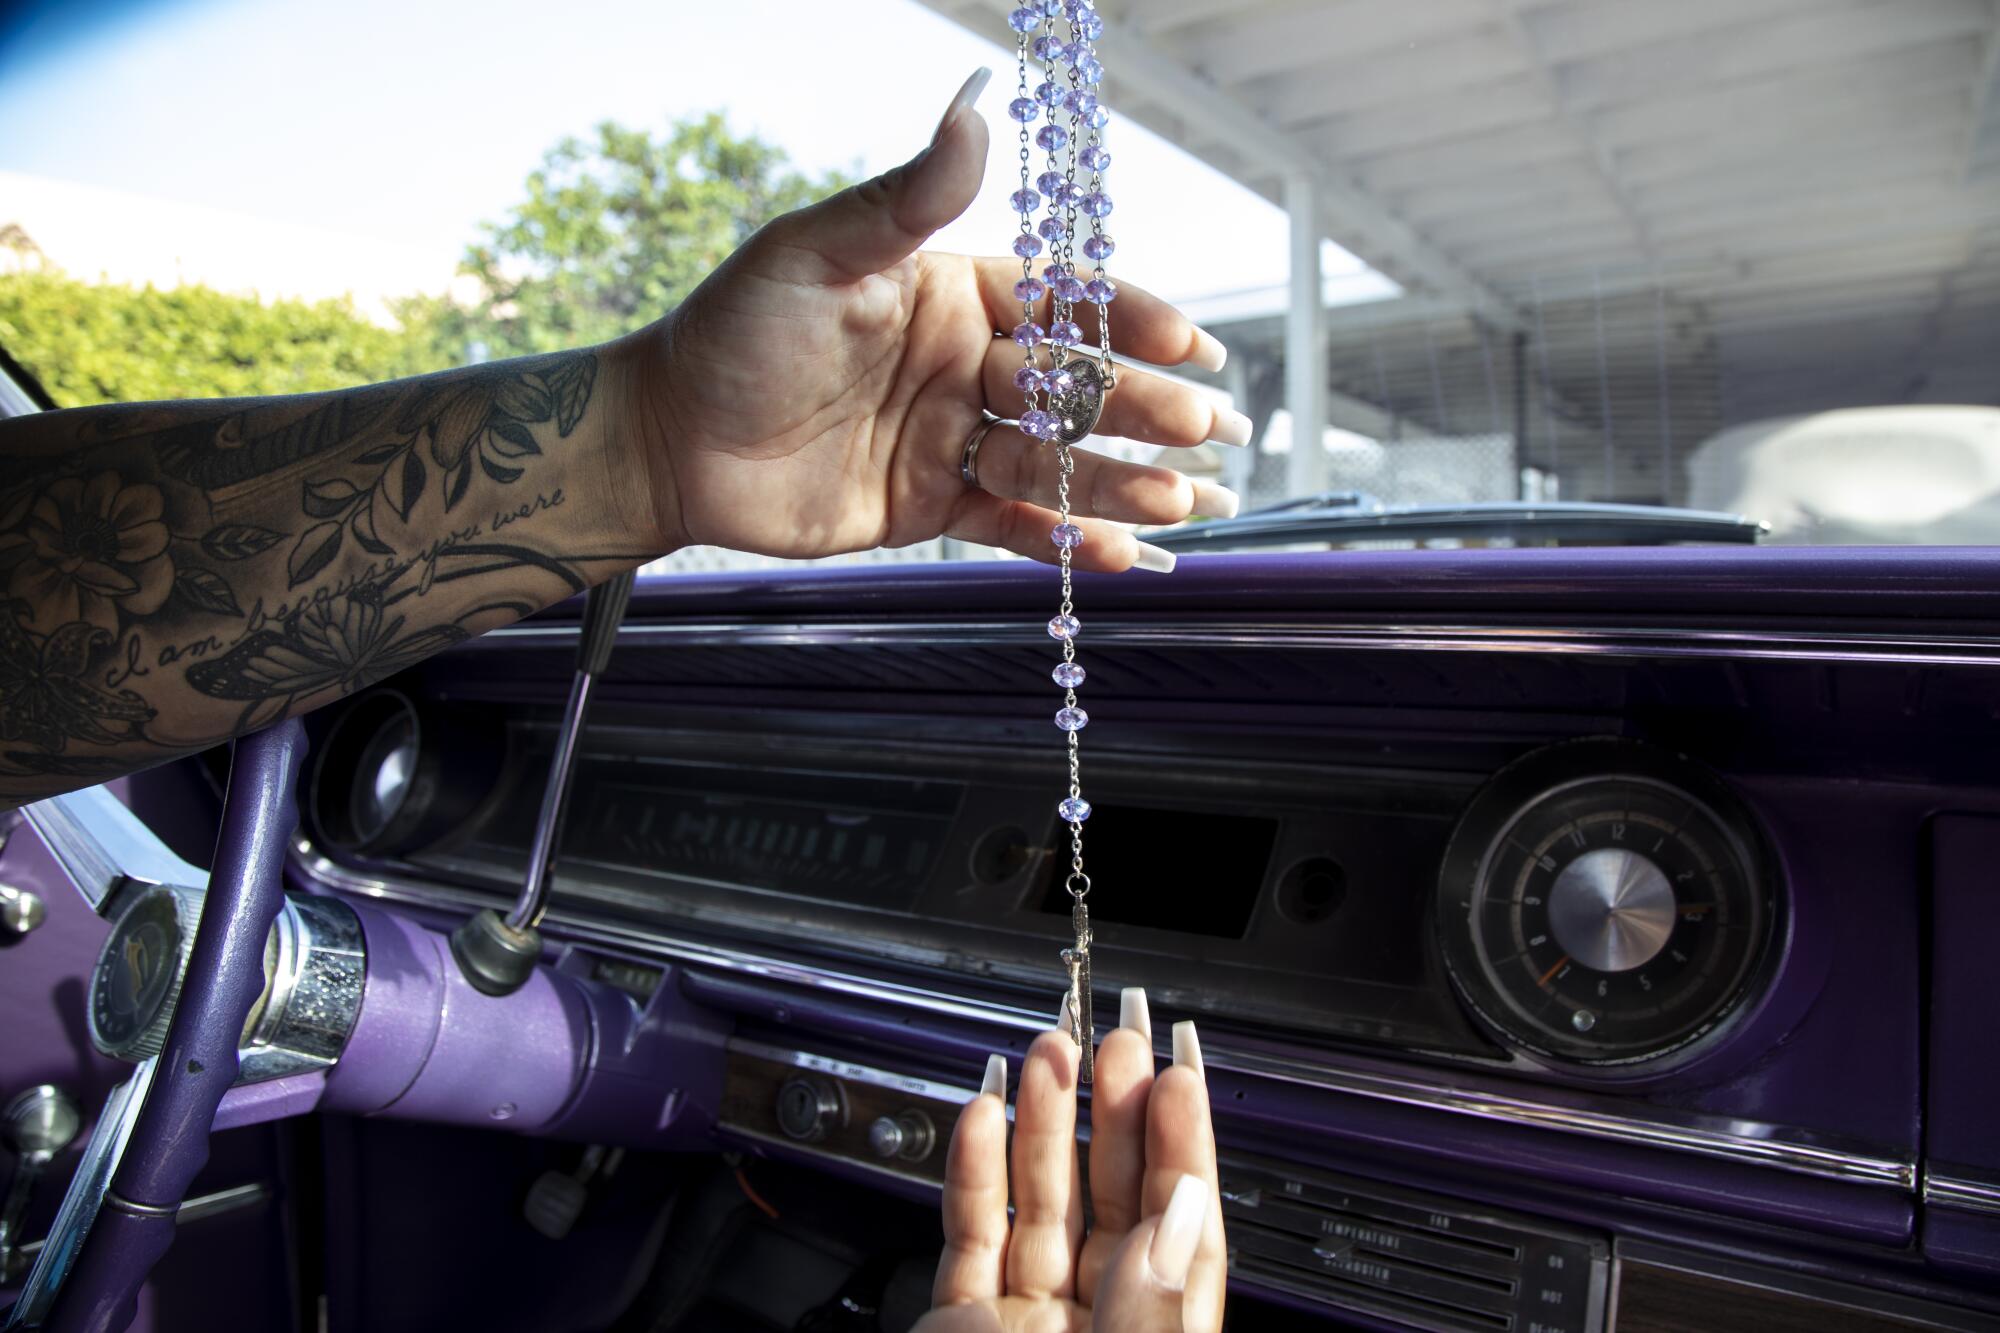 Sofia Toral, 40, shows a purple rosary given to her by her stepmother that matches the color of her 1965 Impala.